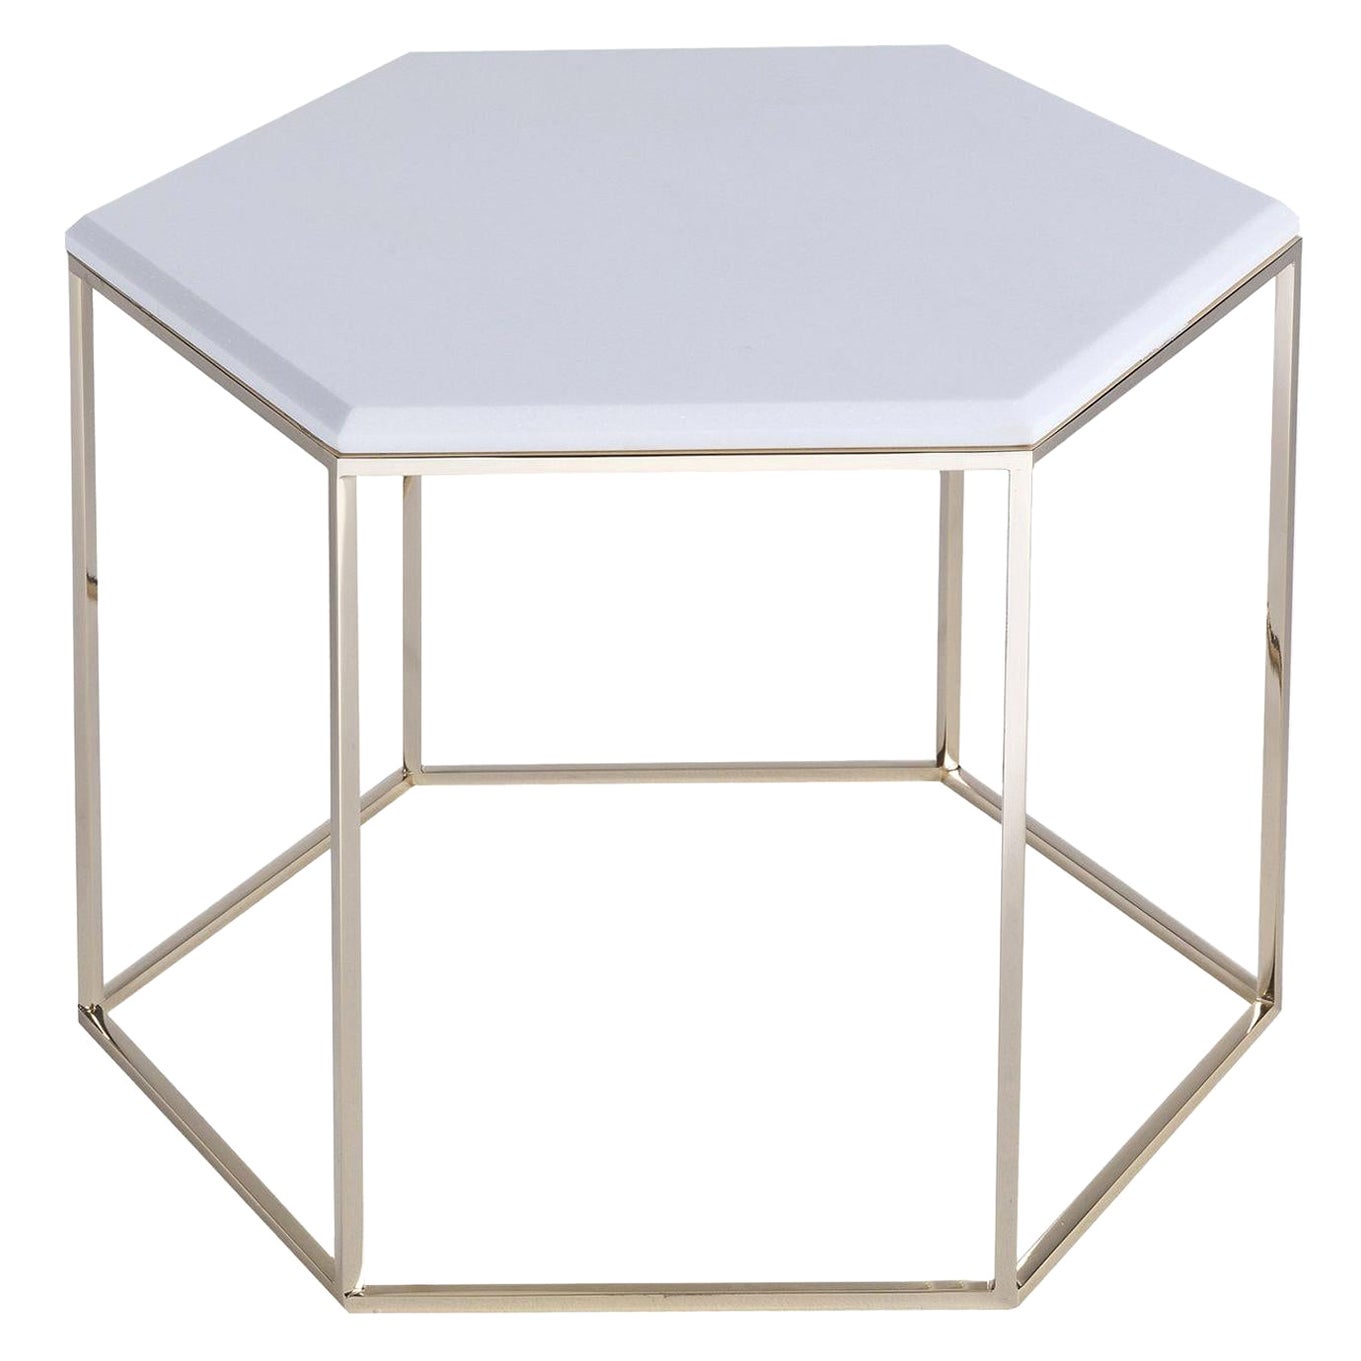 Hexagonal Tall Table with Marble